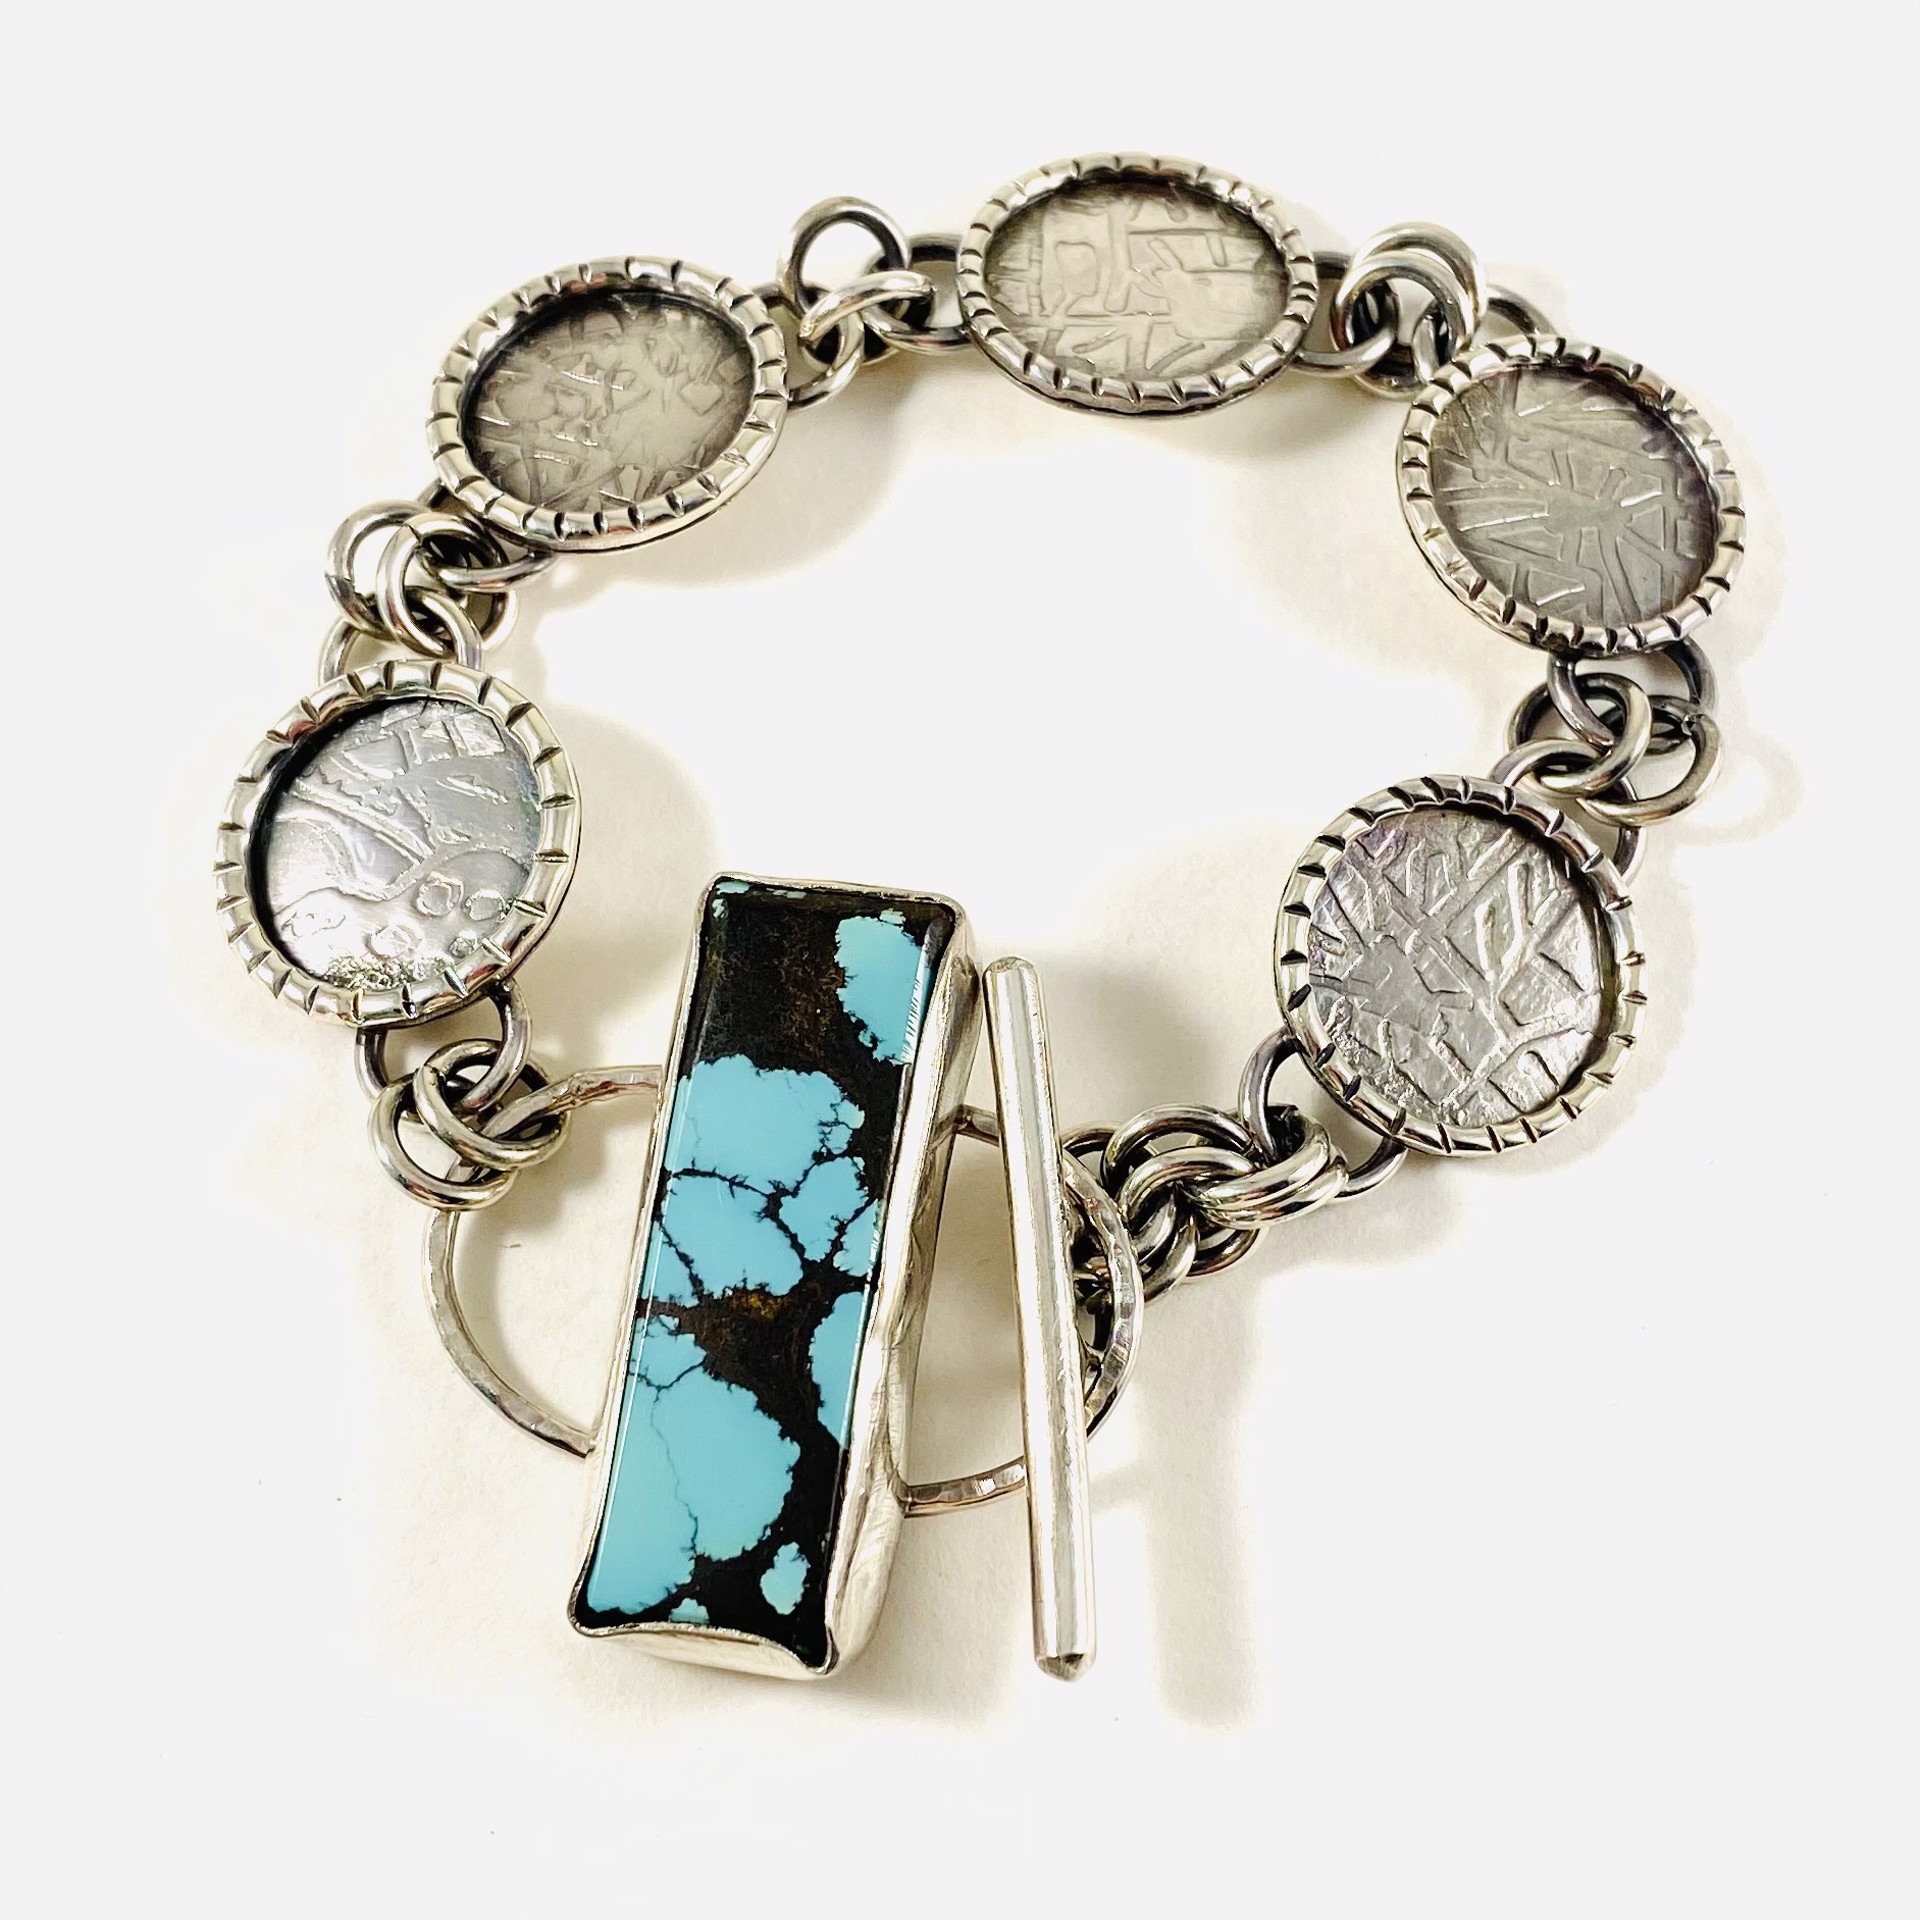 Sterling and Turquoise Link Bracelet 7.25" AB21-23 by Anne Bivens